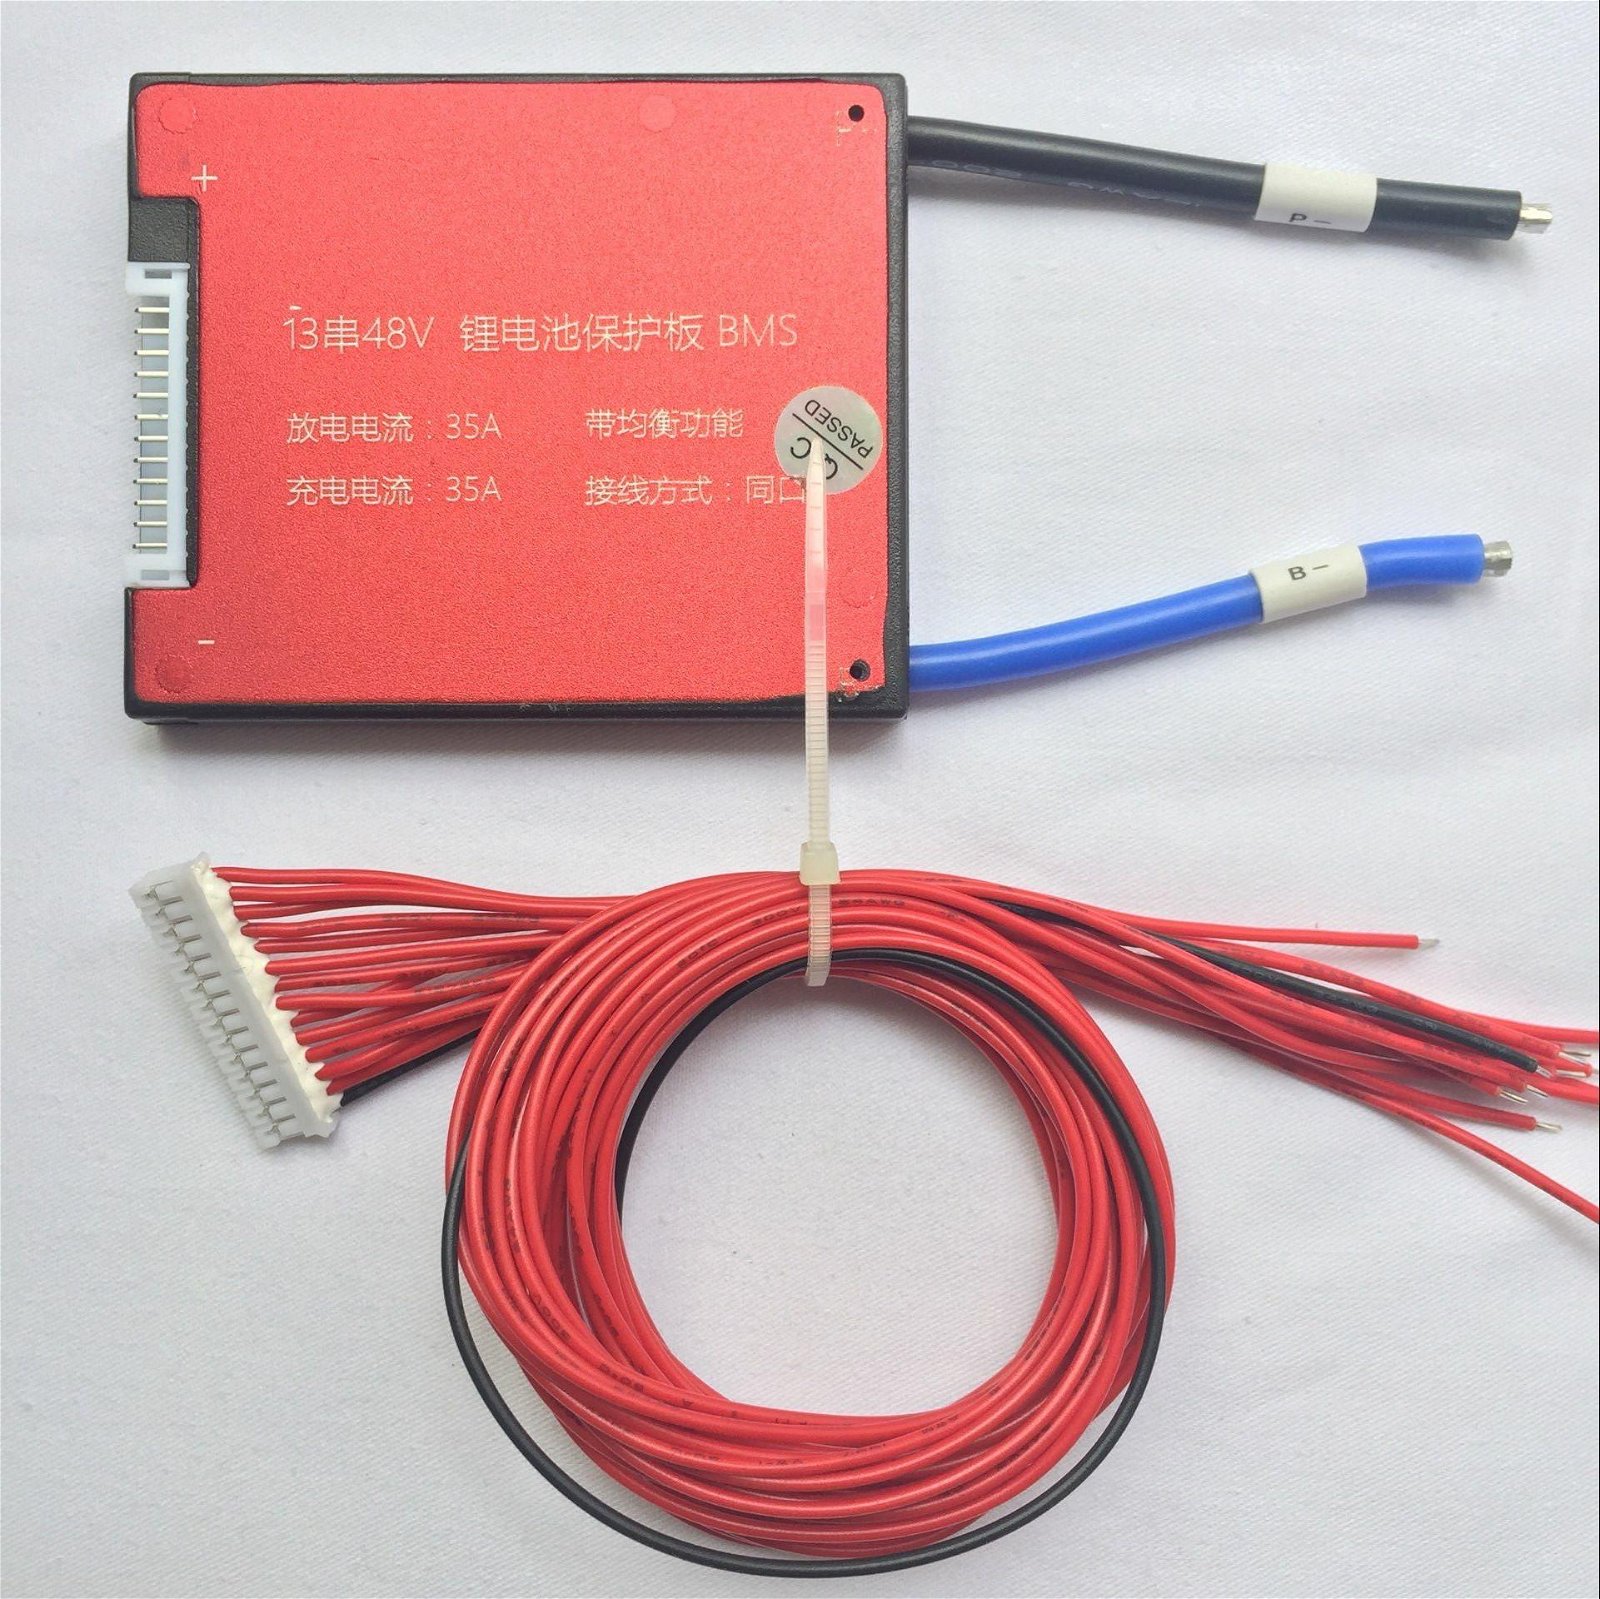 13s 48v 18A 25A 35A 45A 60A lithium ion battery bms protection circuit module 4